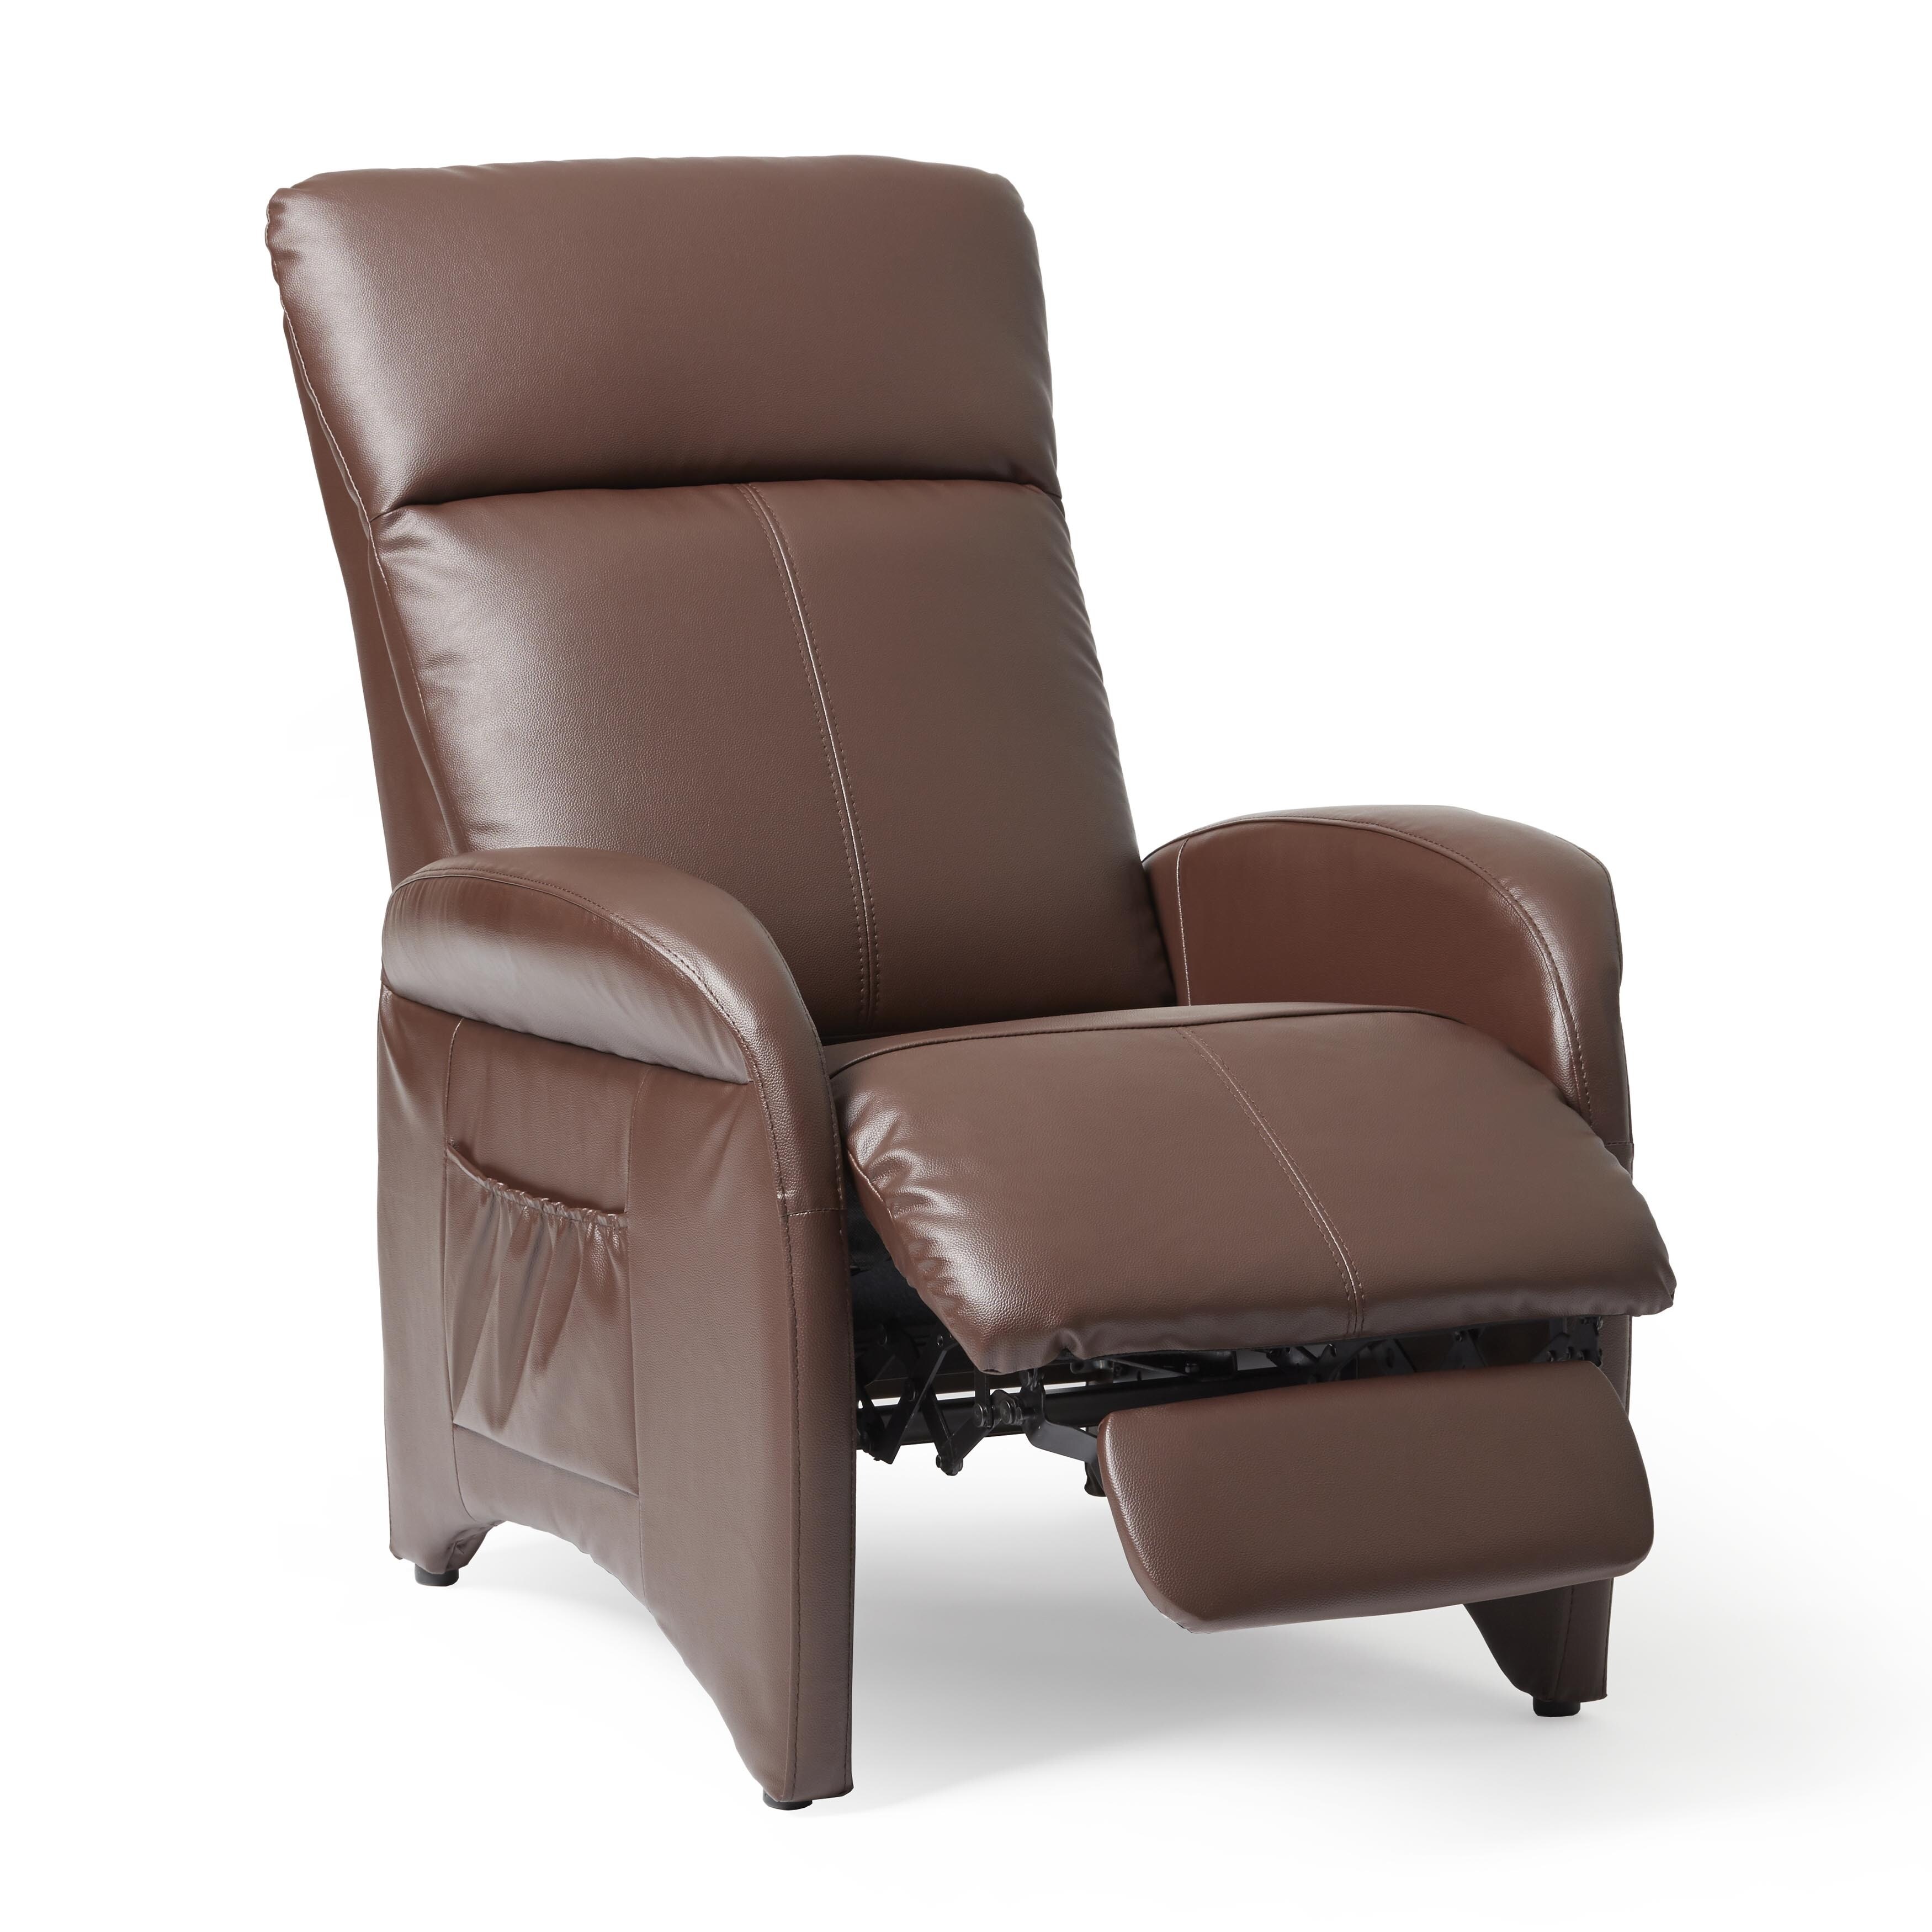 Small Leather Recliners - Home Ideas